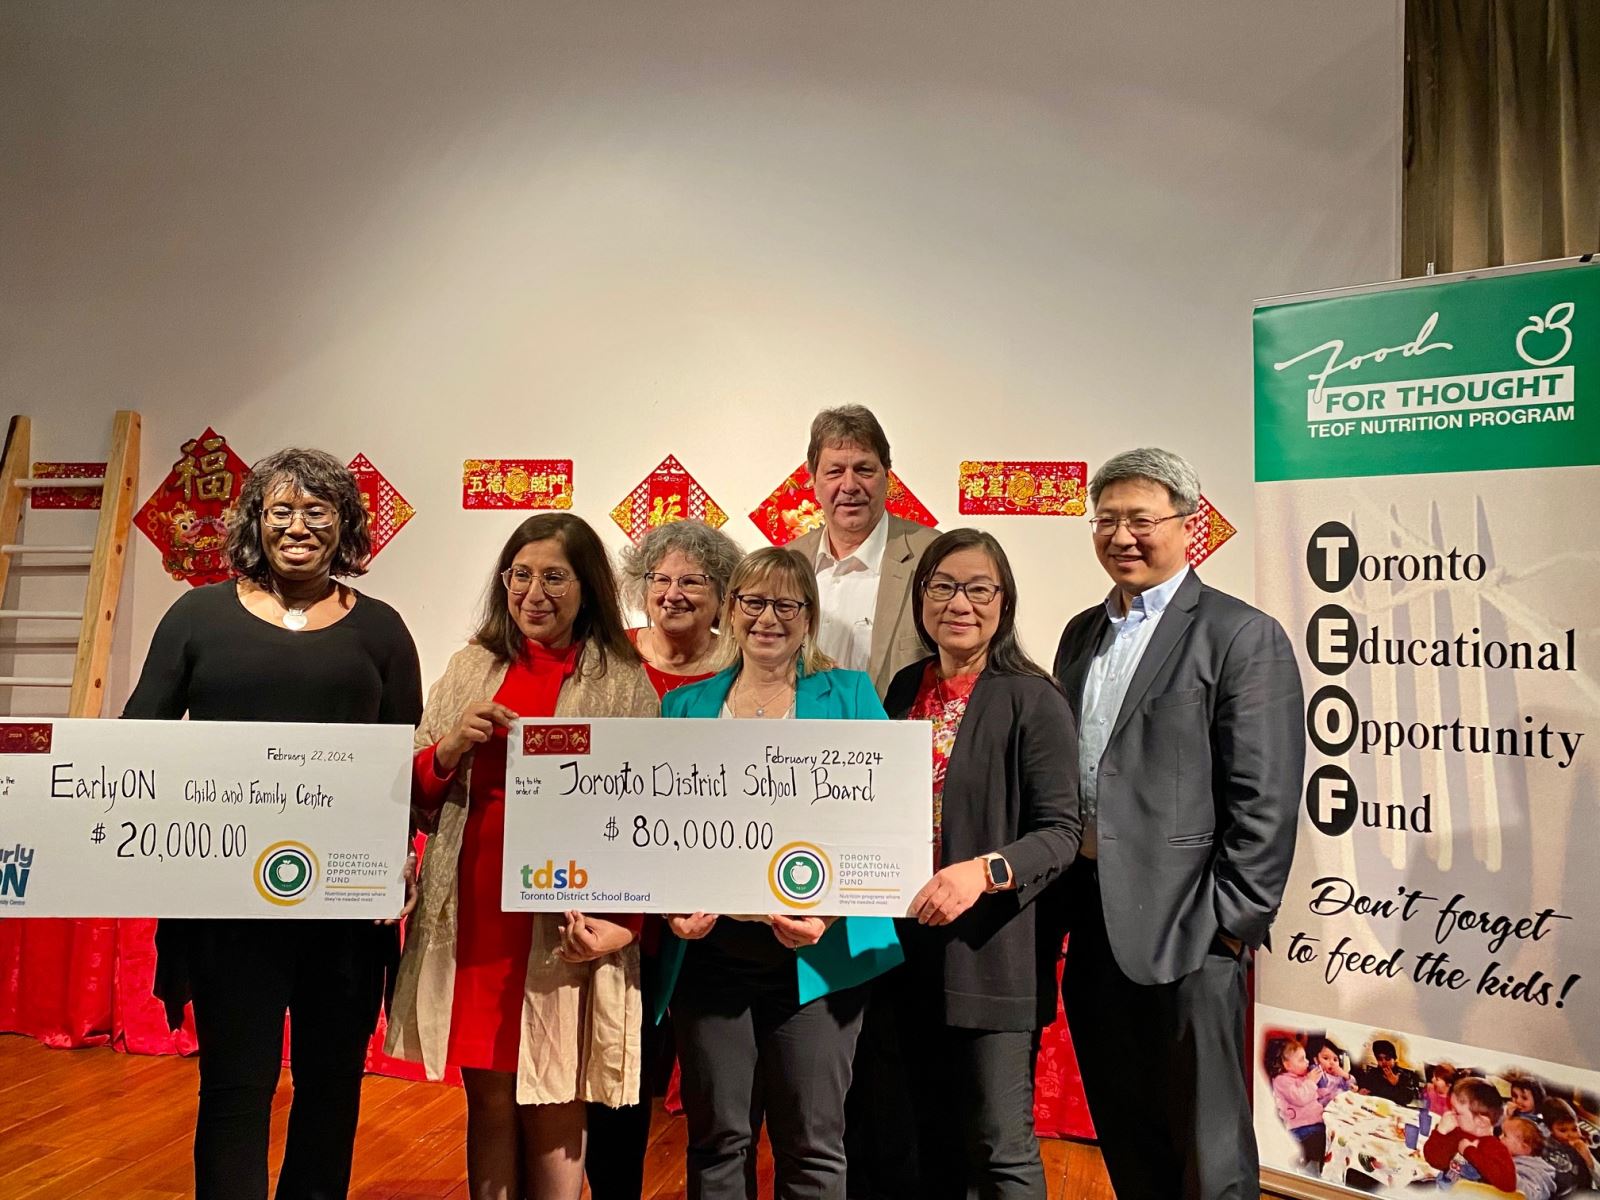 From left to right: Deborah Williams (TDSB Trustee Ward 10), Farzana Rajwani (TDSB Trustee Ward 14), Shelley Laskin (TDSB Trustee Ward 8), Rachel Chernos Lin (TDSB Chair of the Board), Dan MacLean (Trustee Ward 2), Manna Wong (TDSB Trustee Ward 20) and Weidong Pei (TDSB Trustee Ward 12) hold two cheques from the Toronto Educational Opportunity Fund at this year’s Lunar New Year event. 